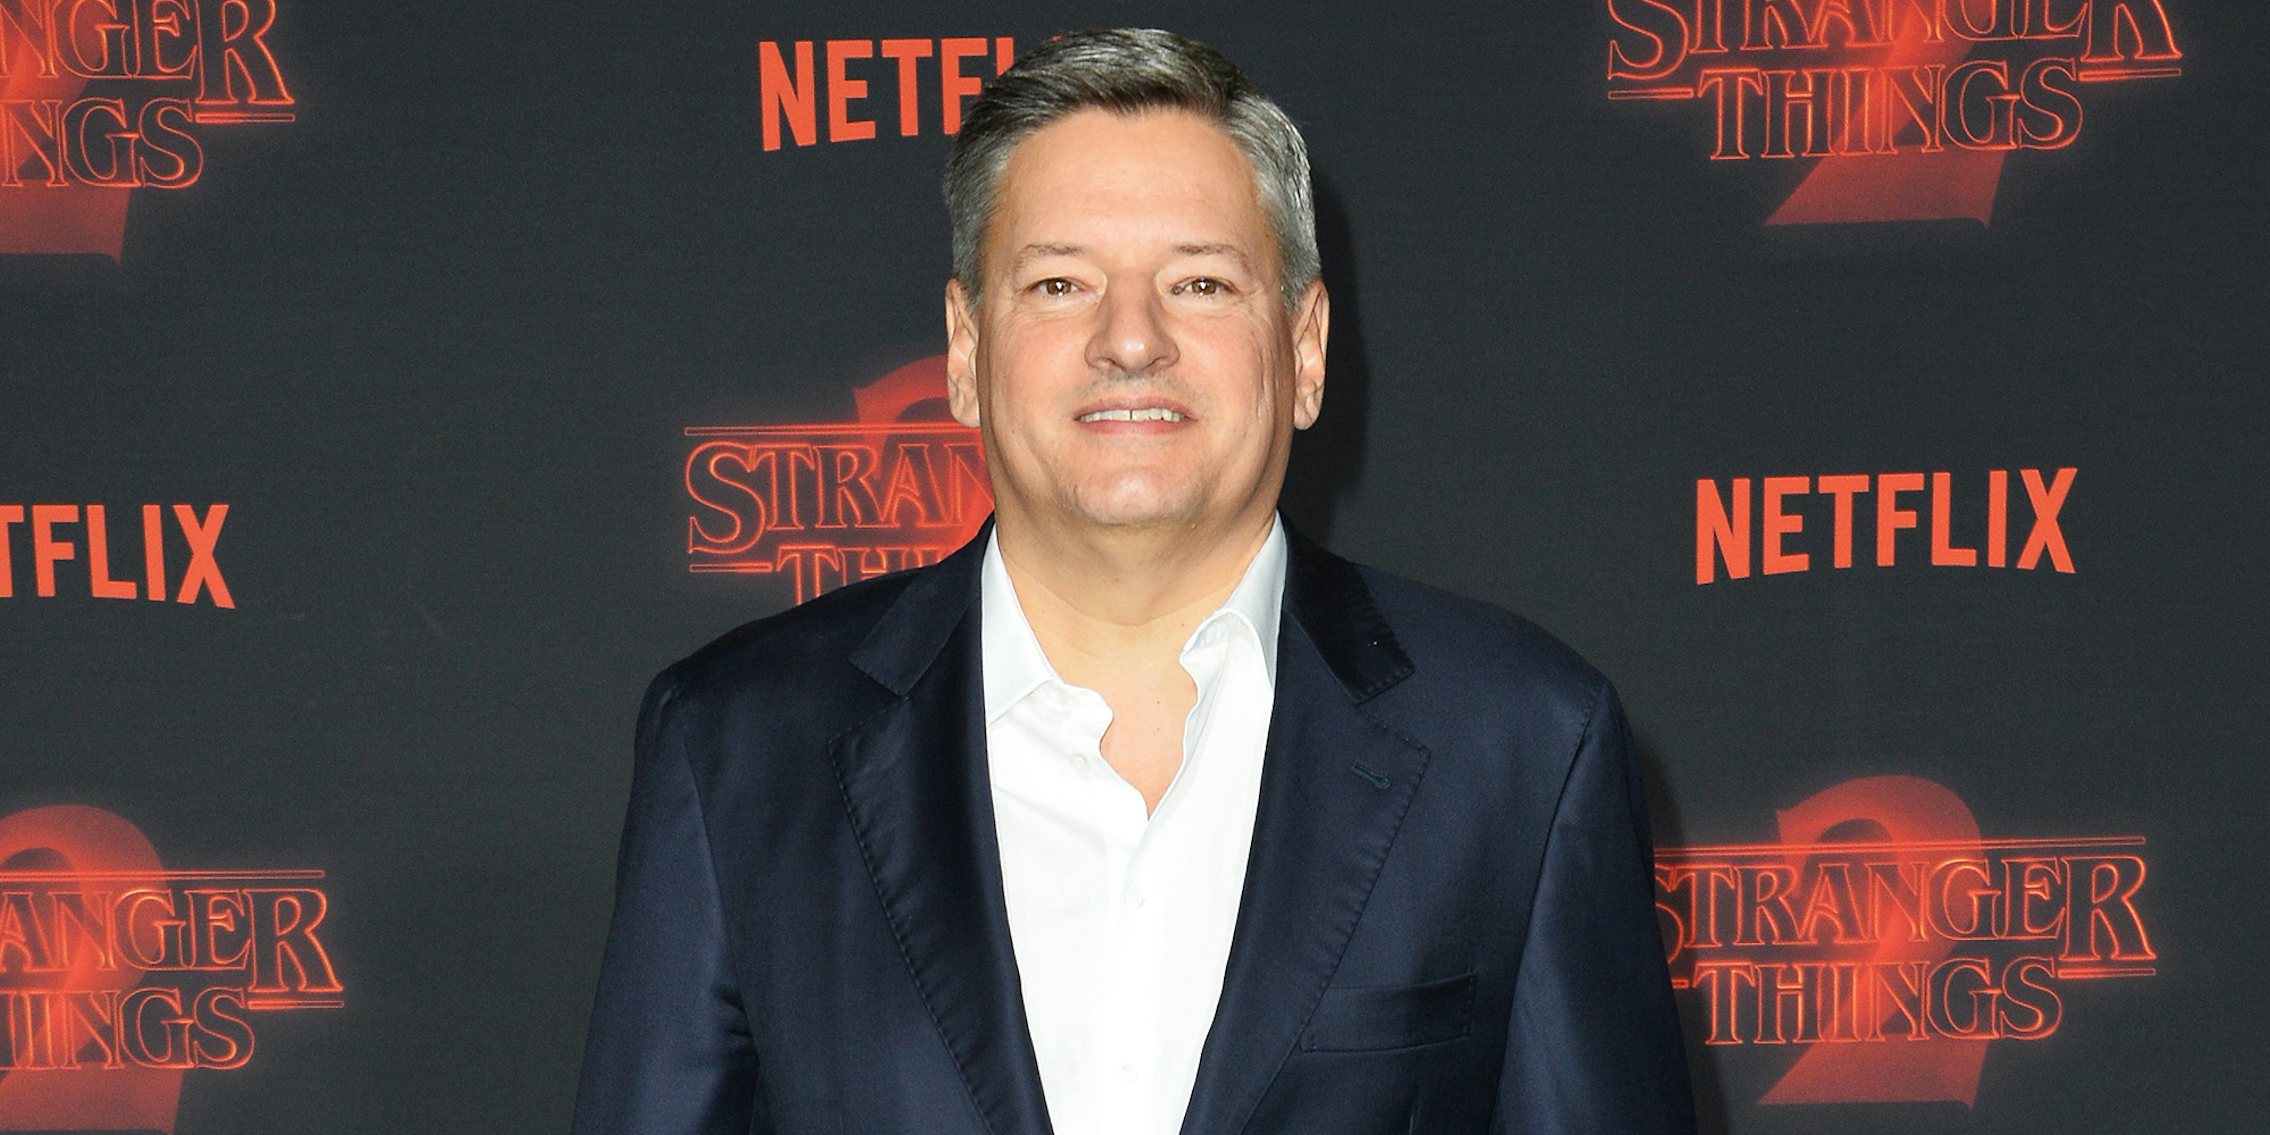 Ted Sarandos in front of grey and red Netflix background